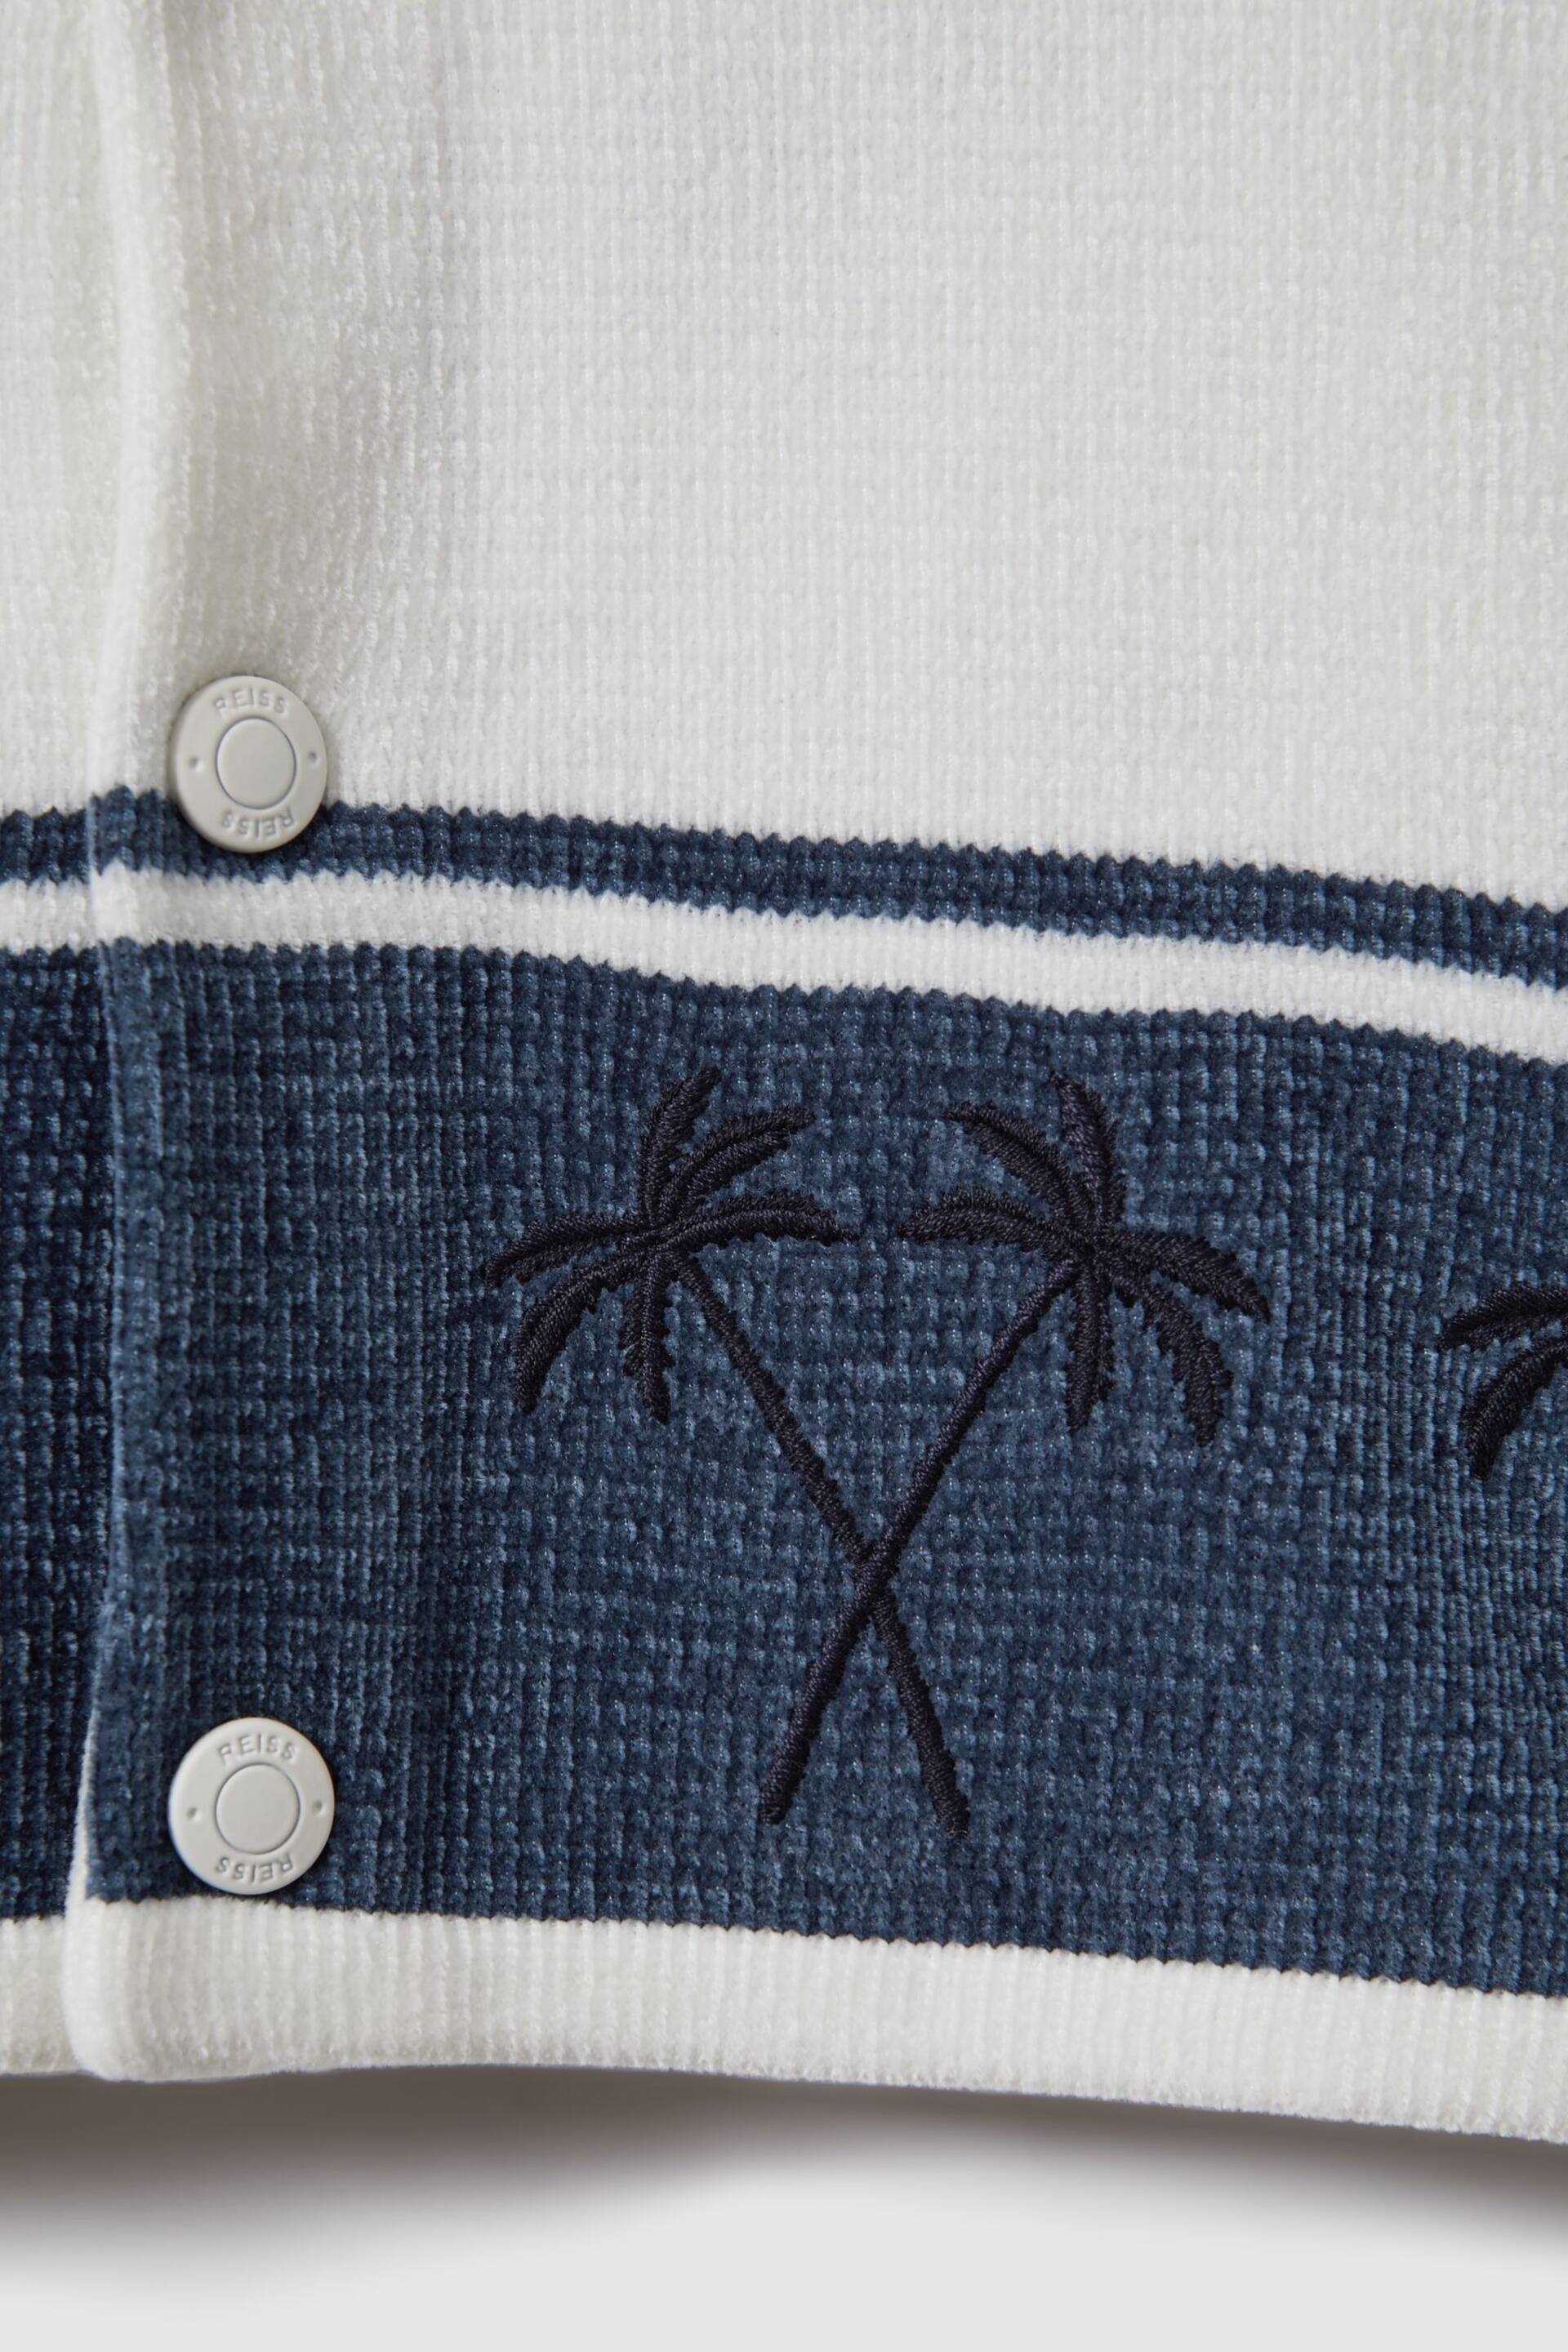 Reiss Optic White/Airforce Blue Bowler Junior Velour Embroidered Striped Shirt - Image 4 of 4